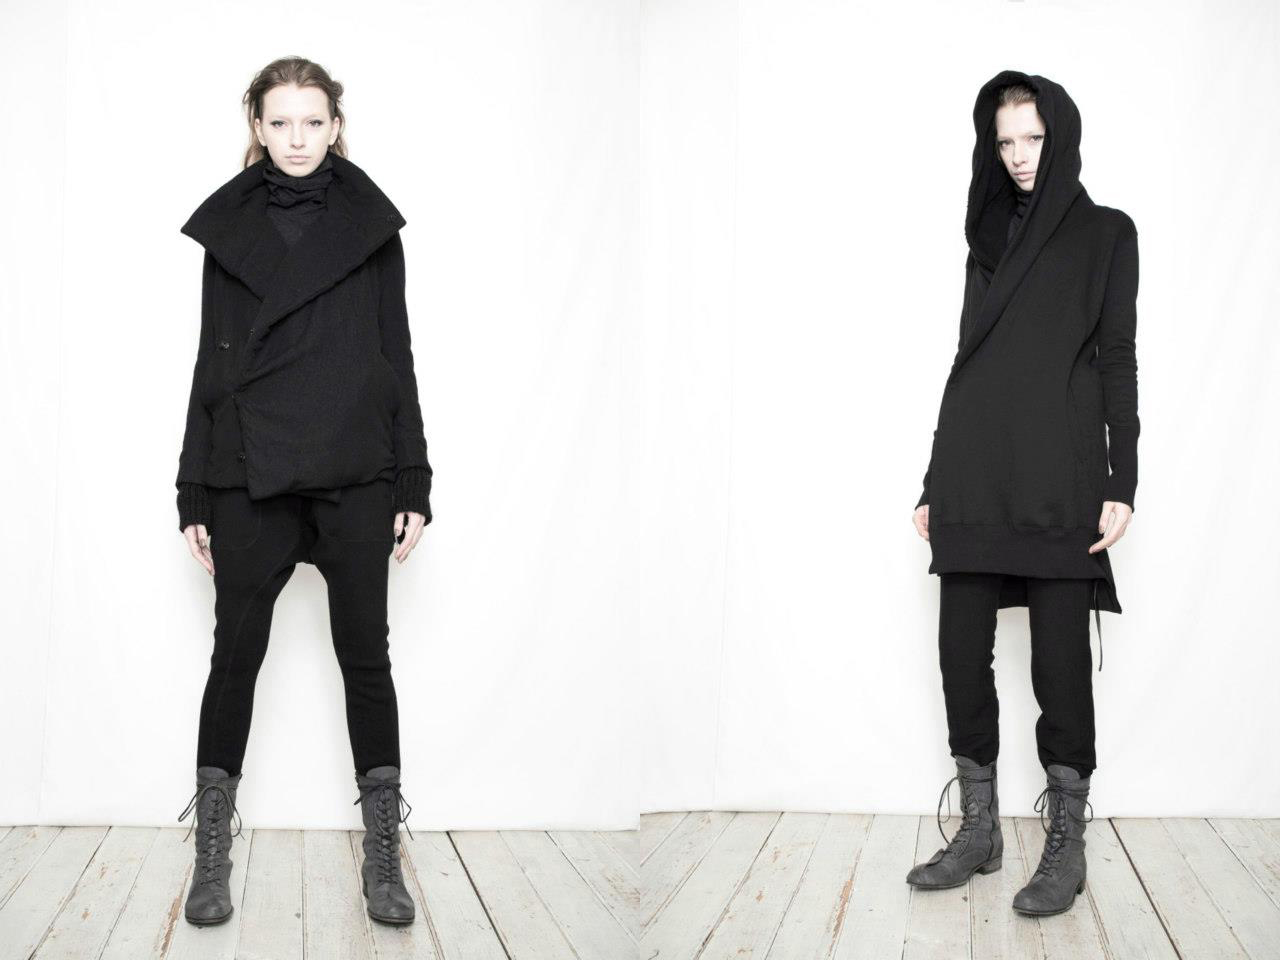 Nude: Masahiko Maruyama - A/W 2013-14 | In search of the Missing Light